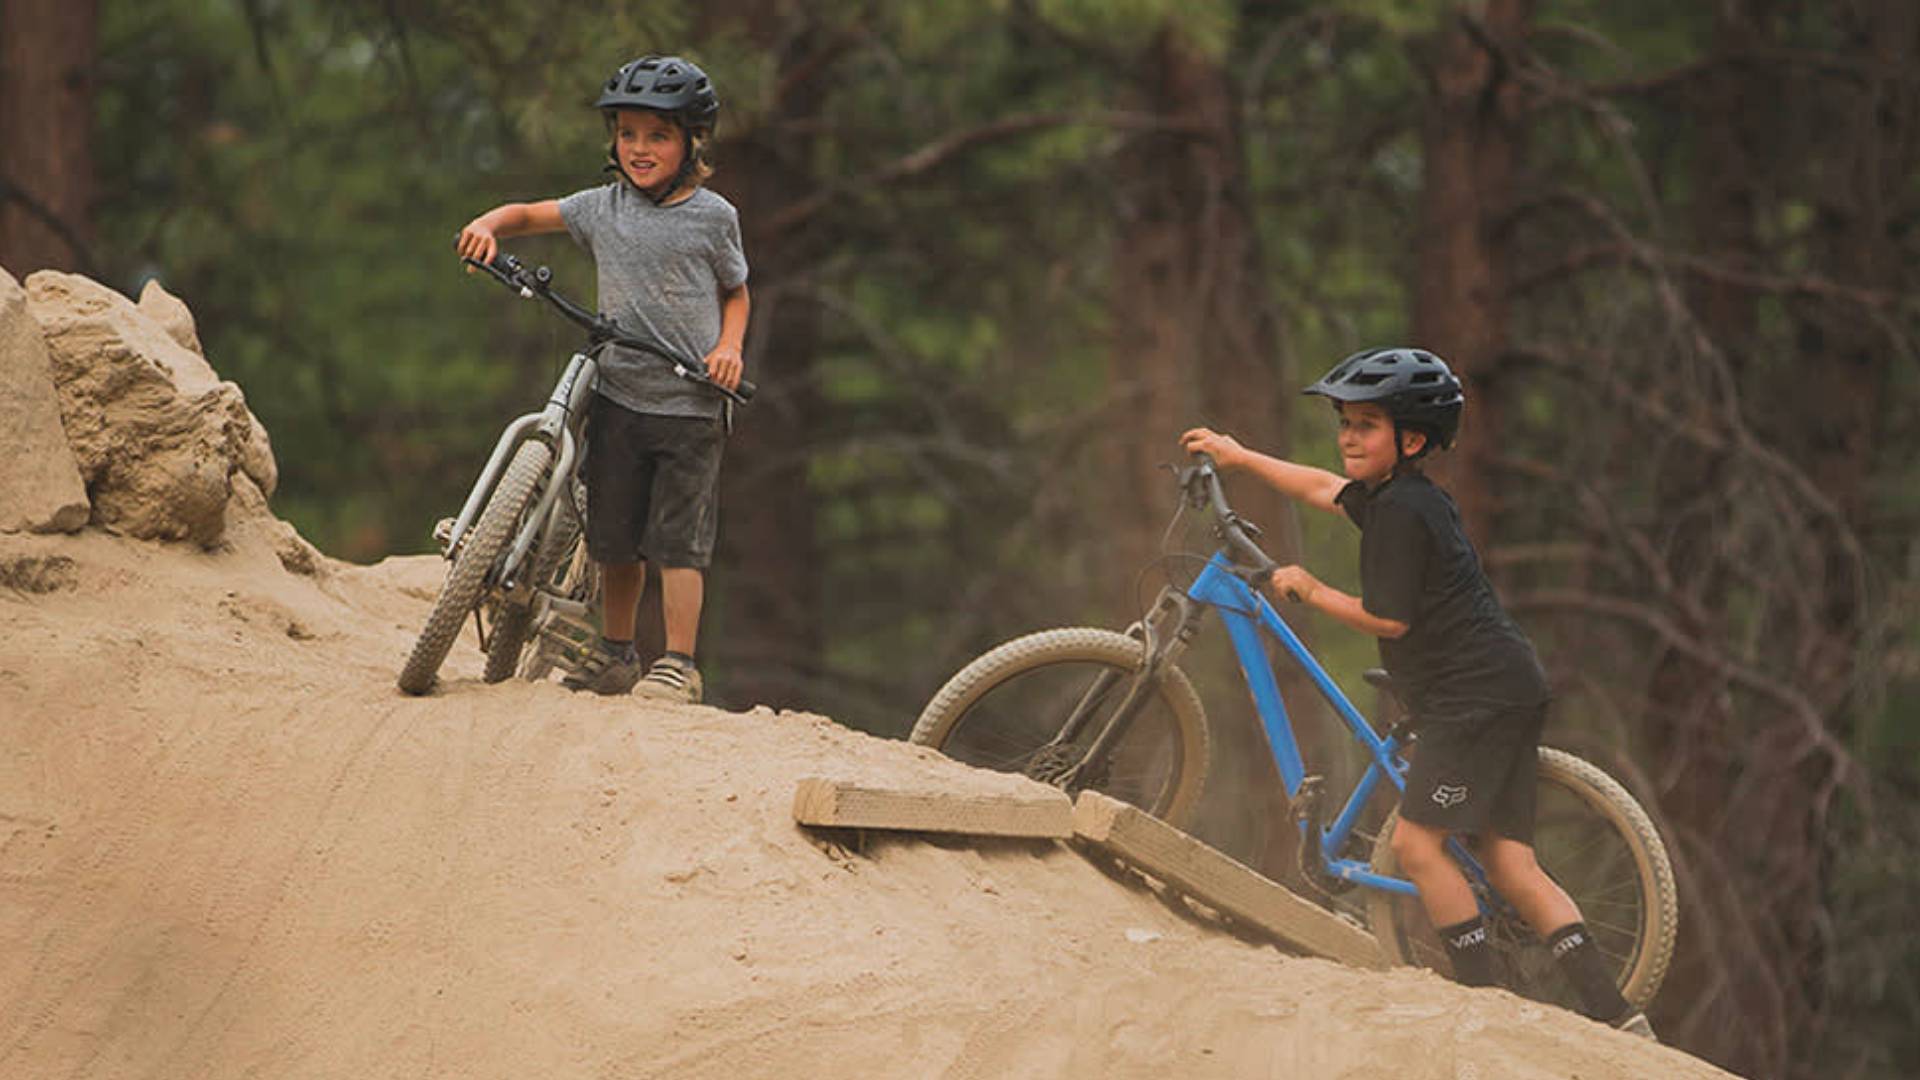 Why We Want our Kids to Ride Mountain Bikes